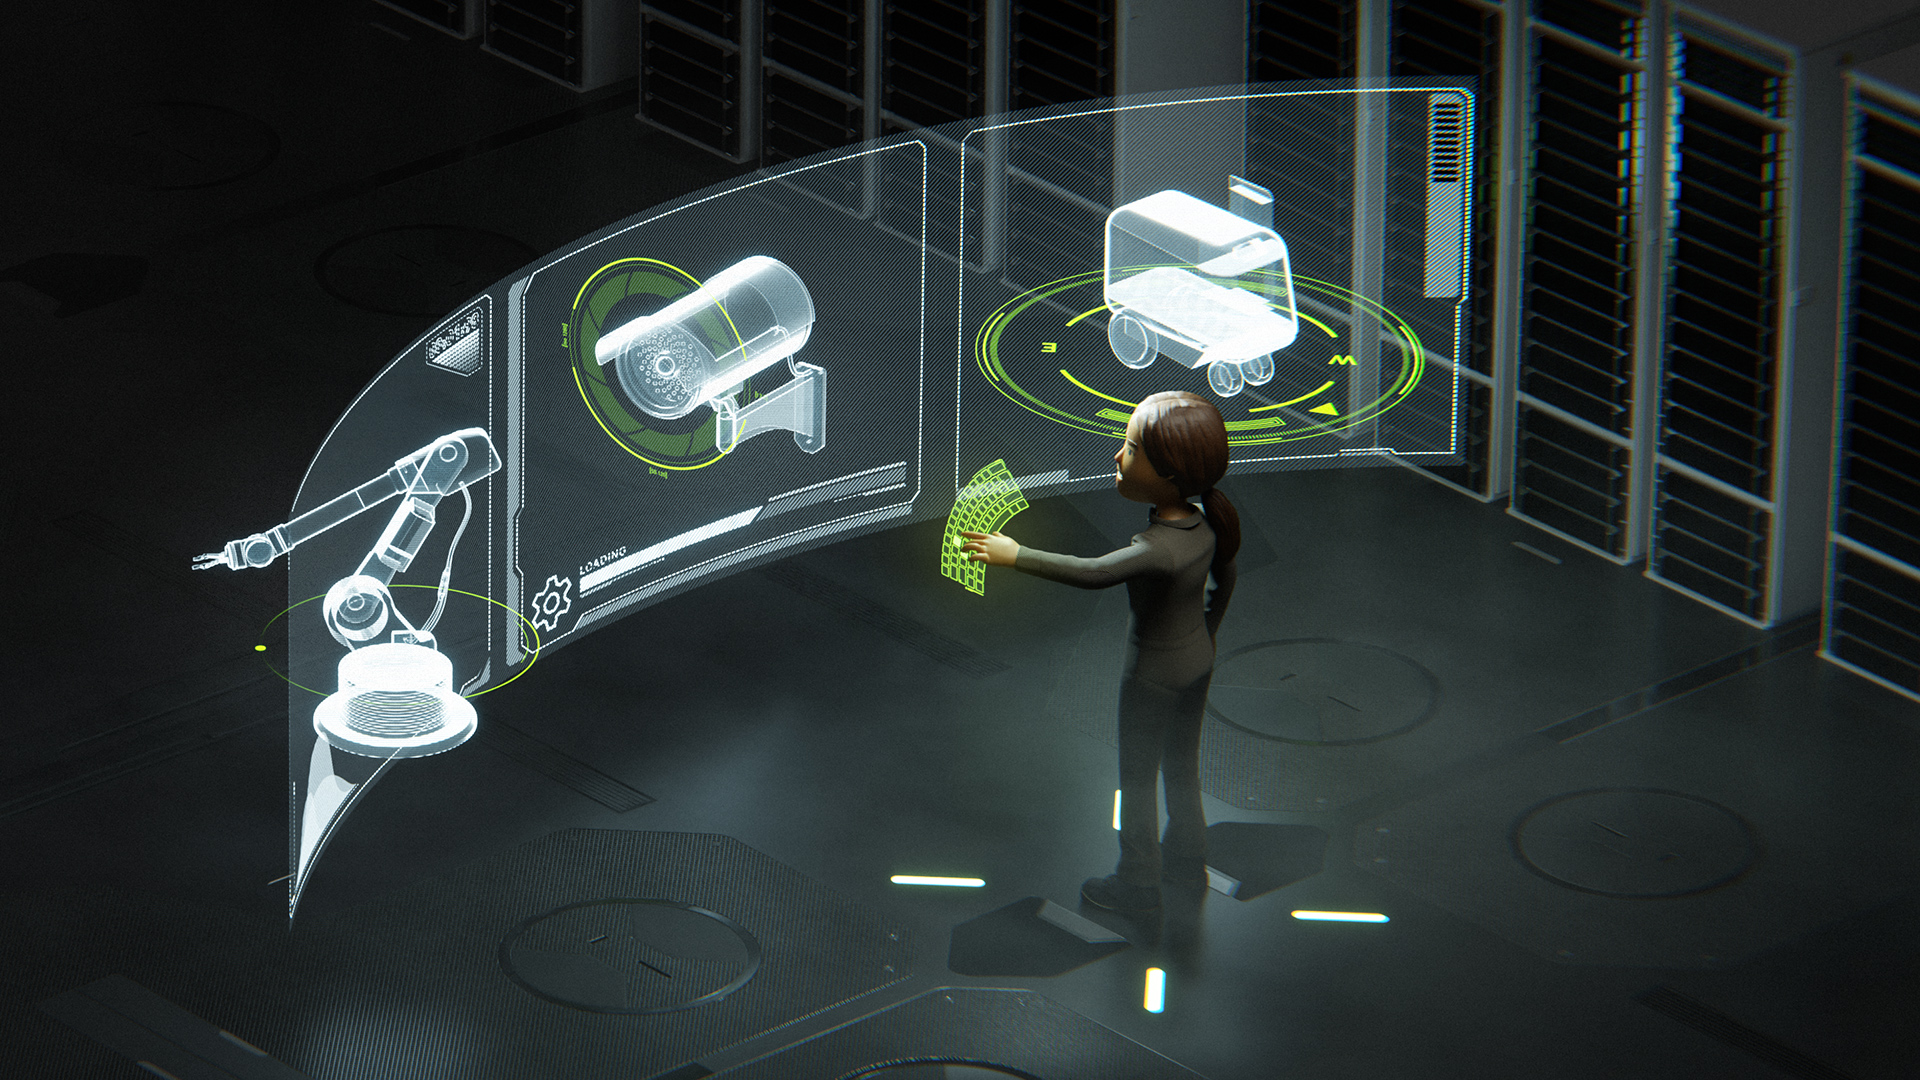 Futuristic graphic of woman using a floating keyboard kiosk with multiple robotics screens displaying robotic arms, video surveillance, and a robotics vehicle.